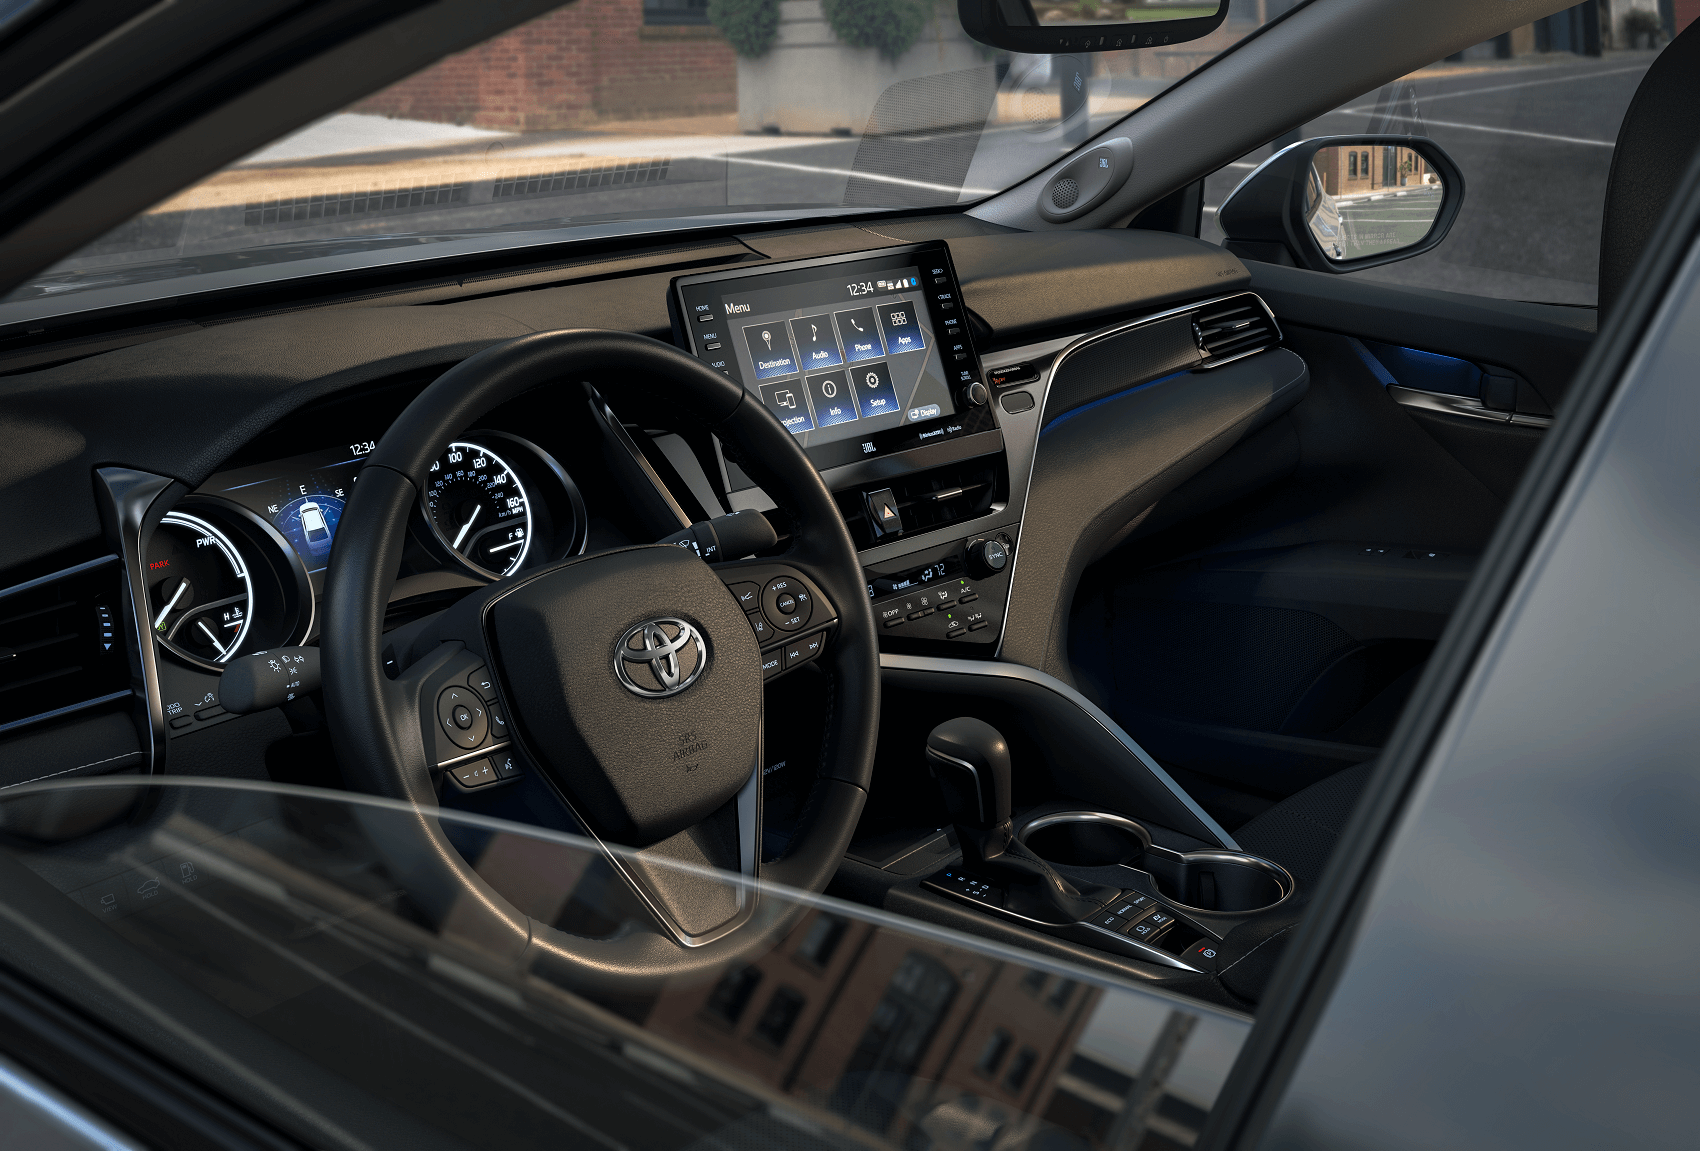 2021 Toyota Camry Hybrid Review Avon IN
